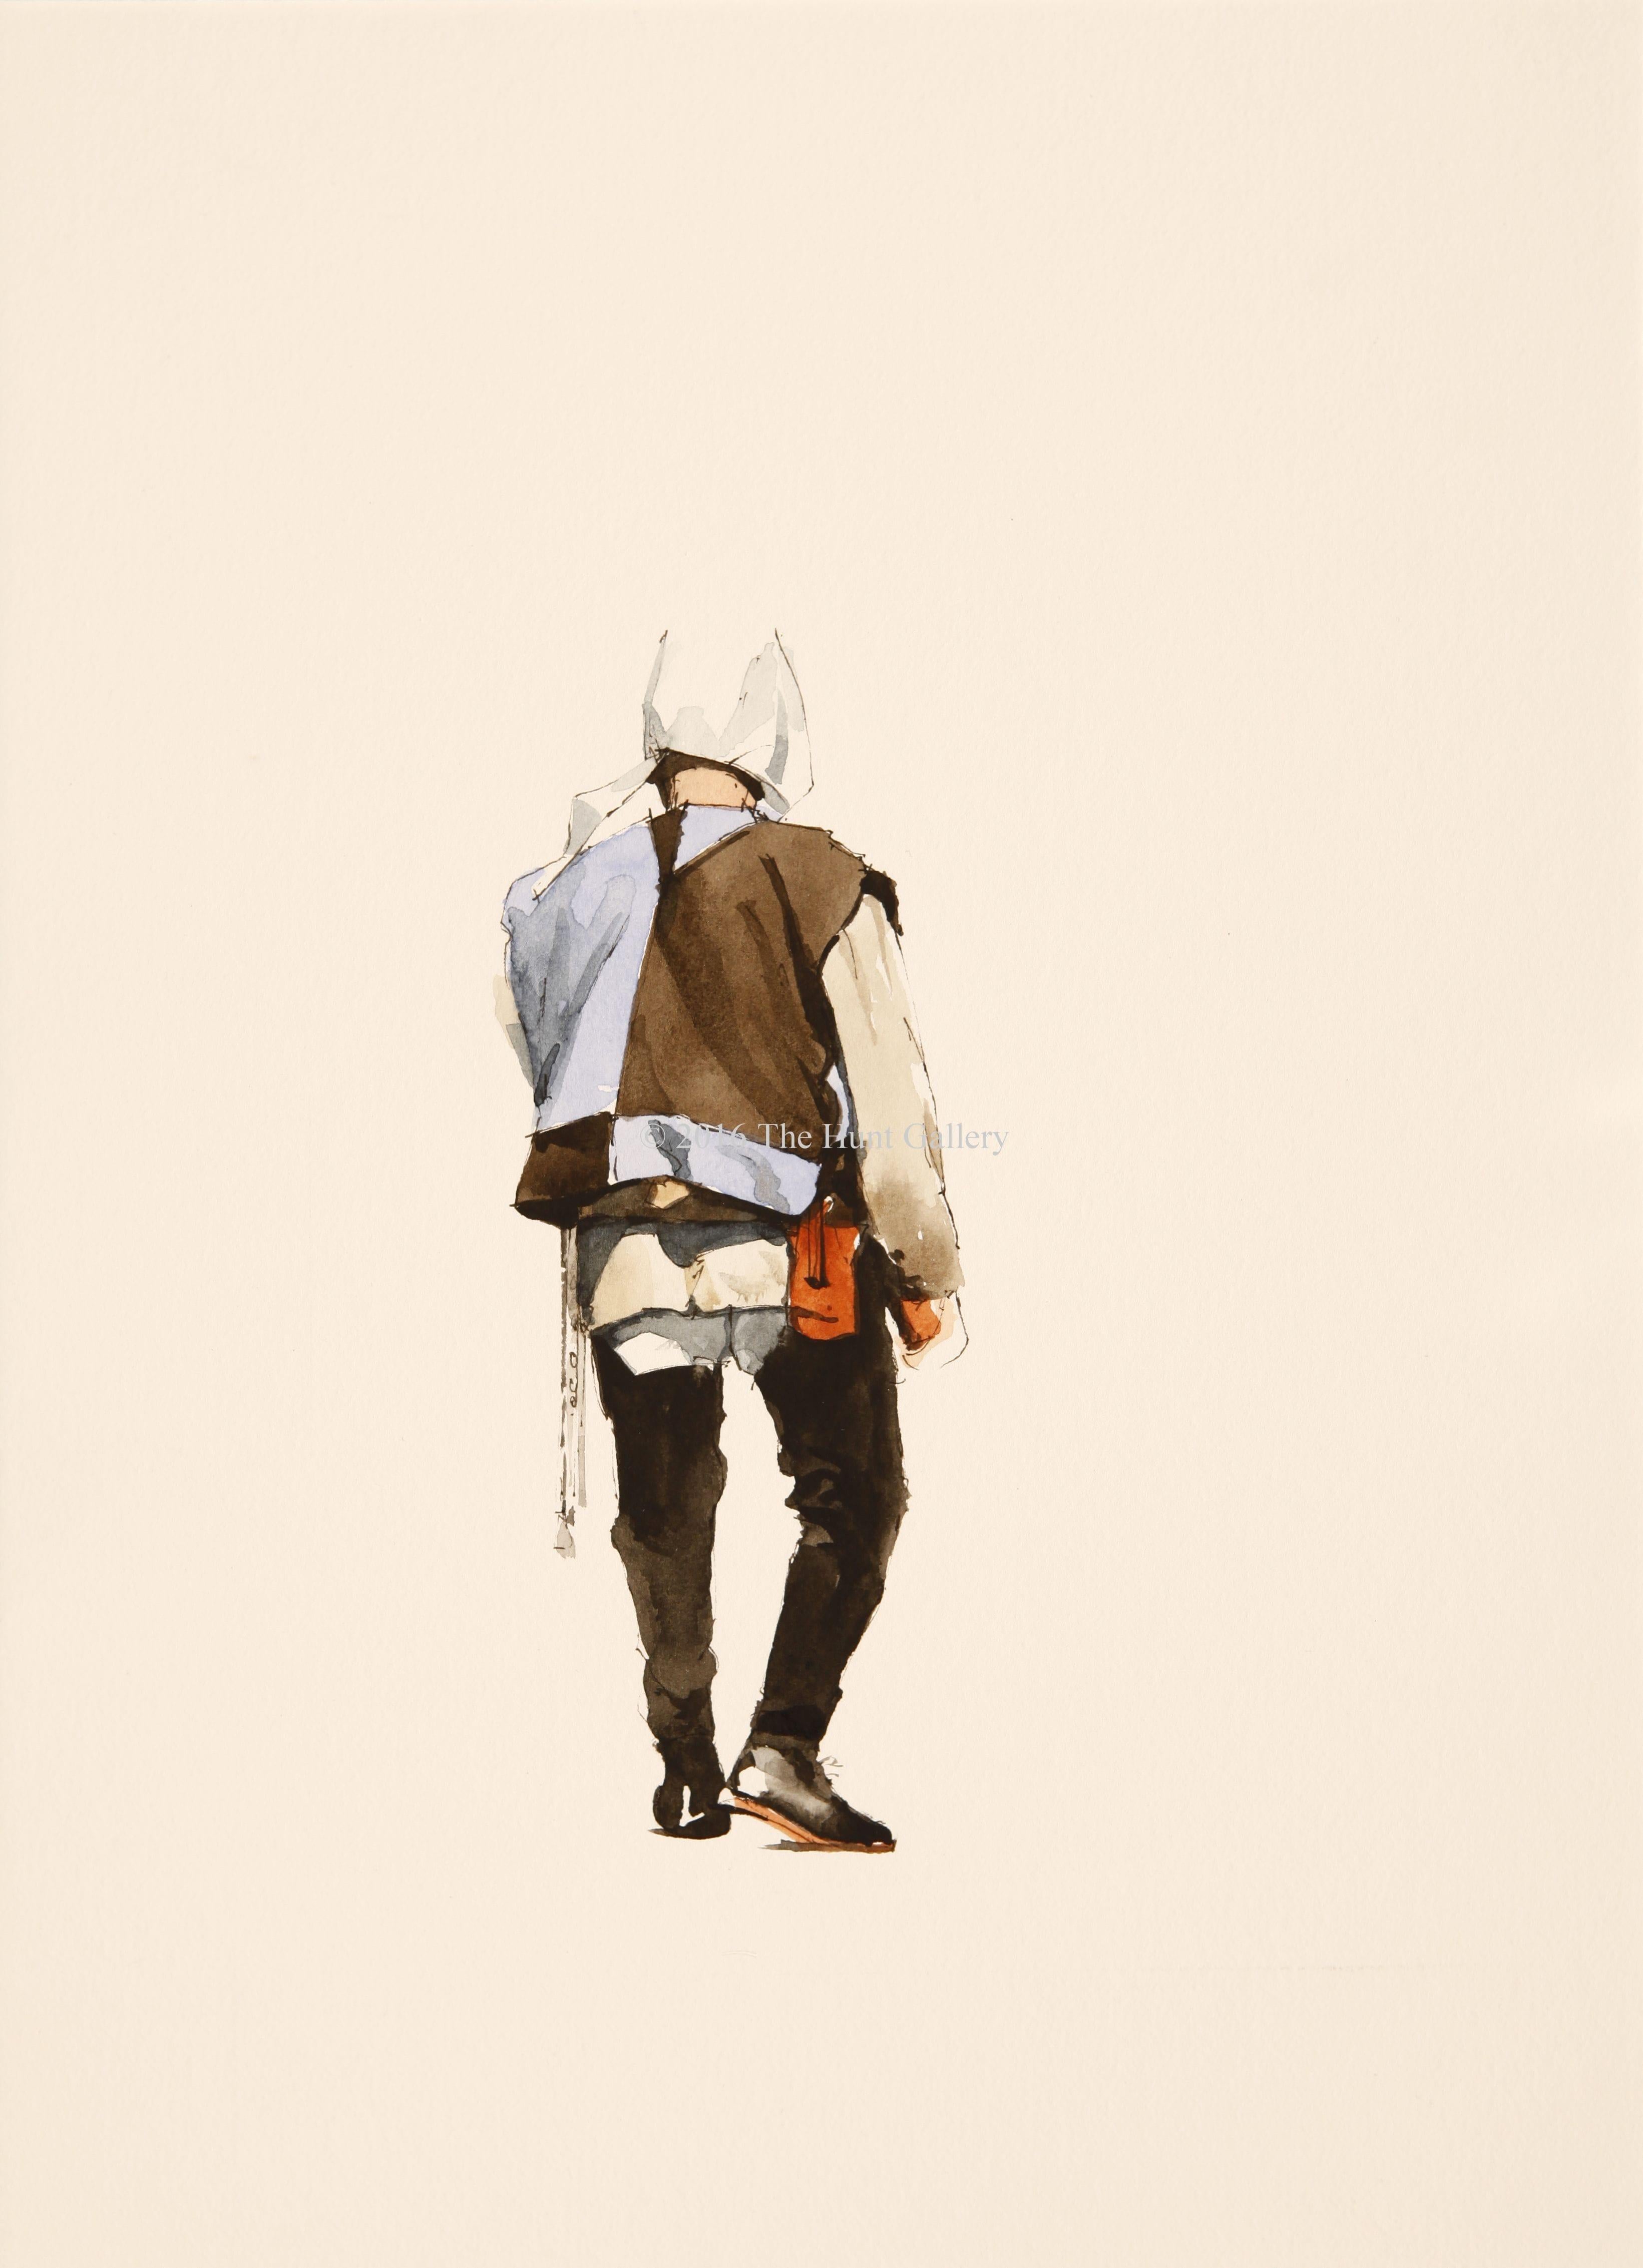 The yeoman
by
Michael John Hunt
Pen and watercolour
9" x 6"